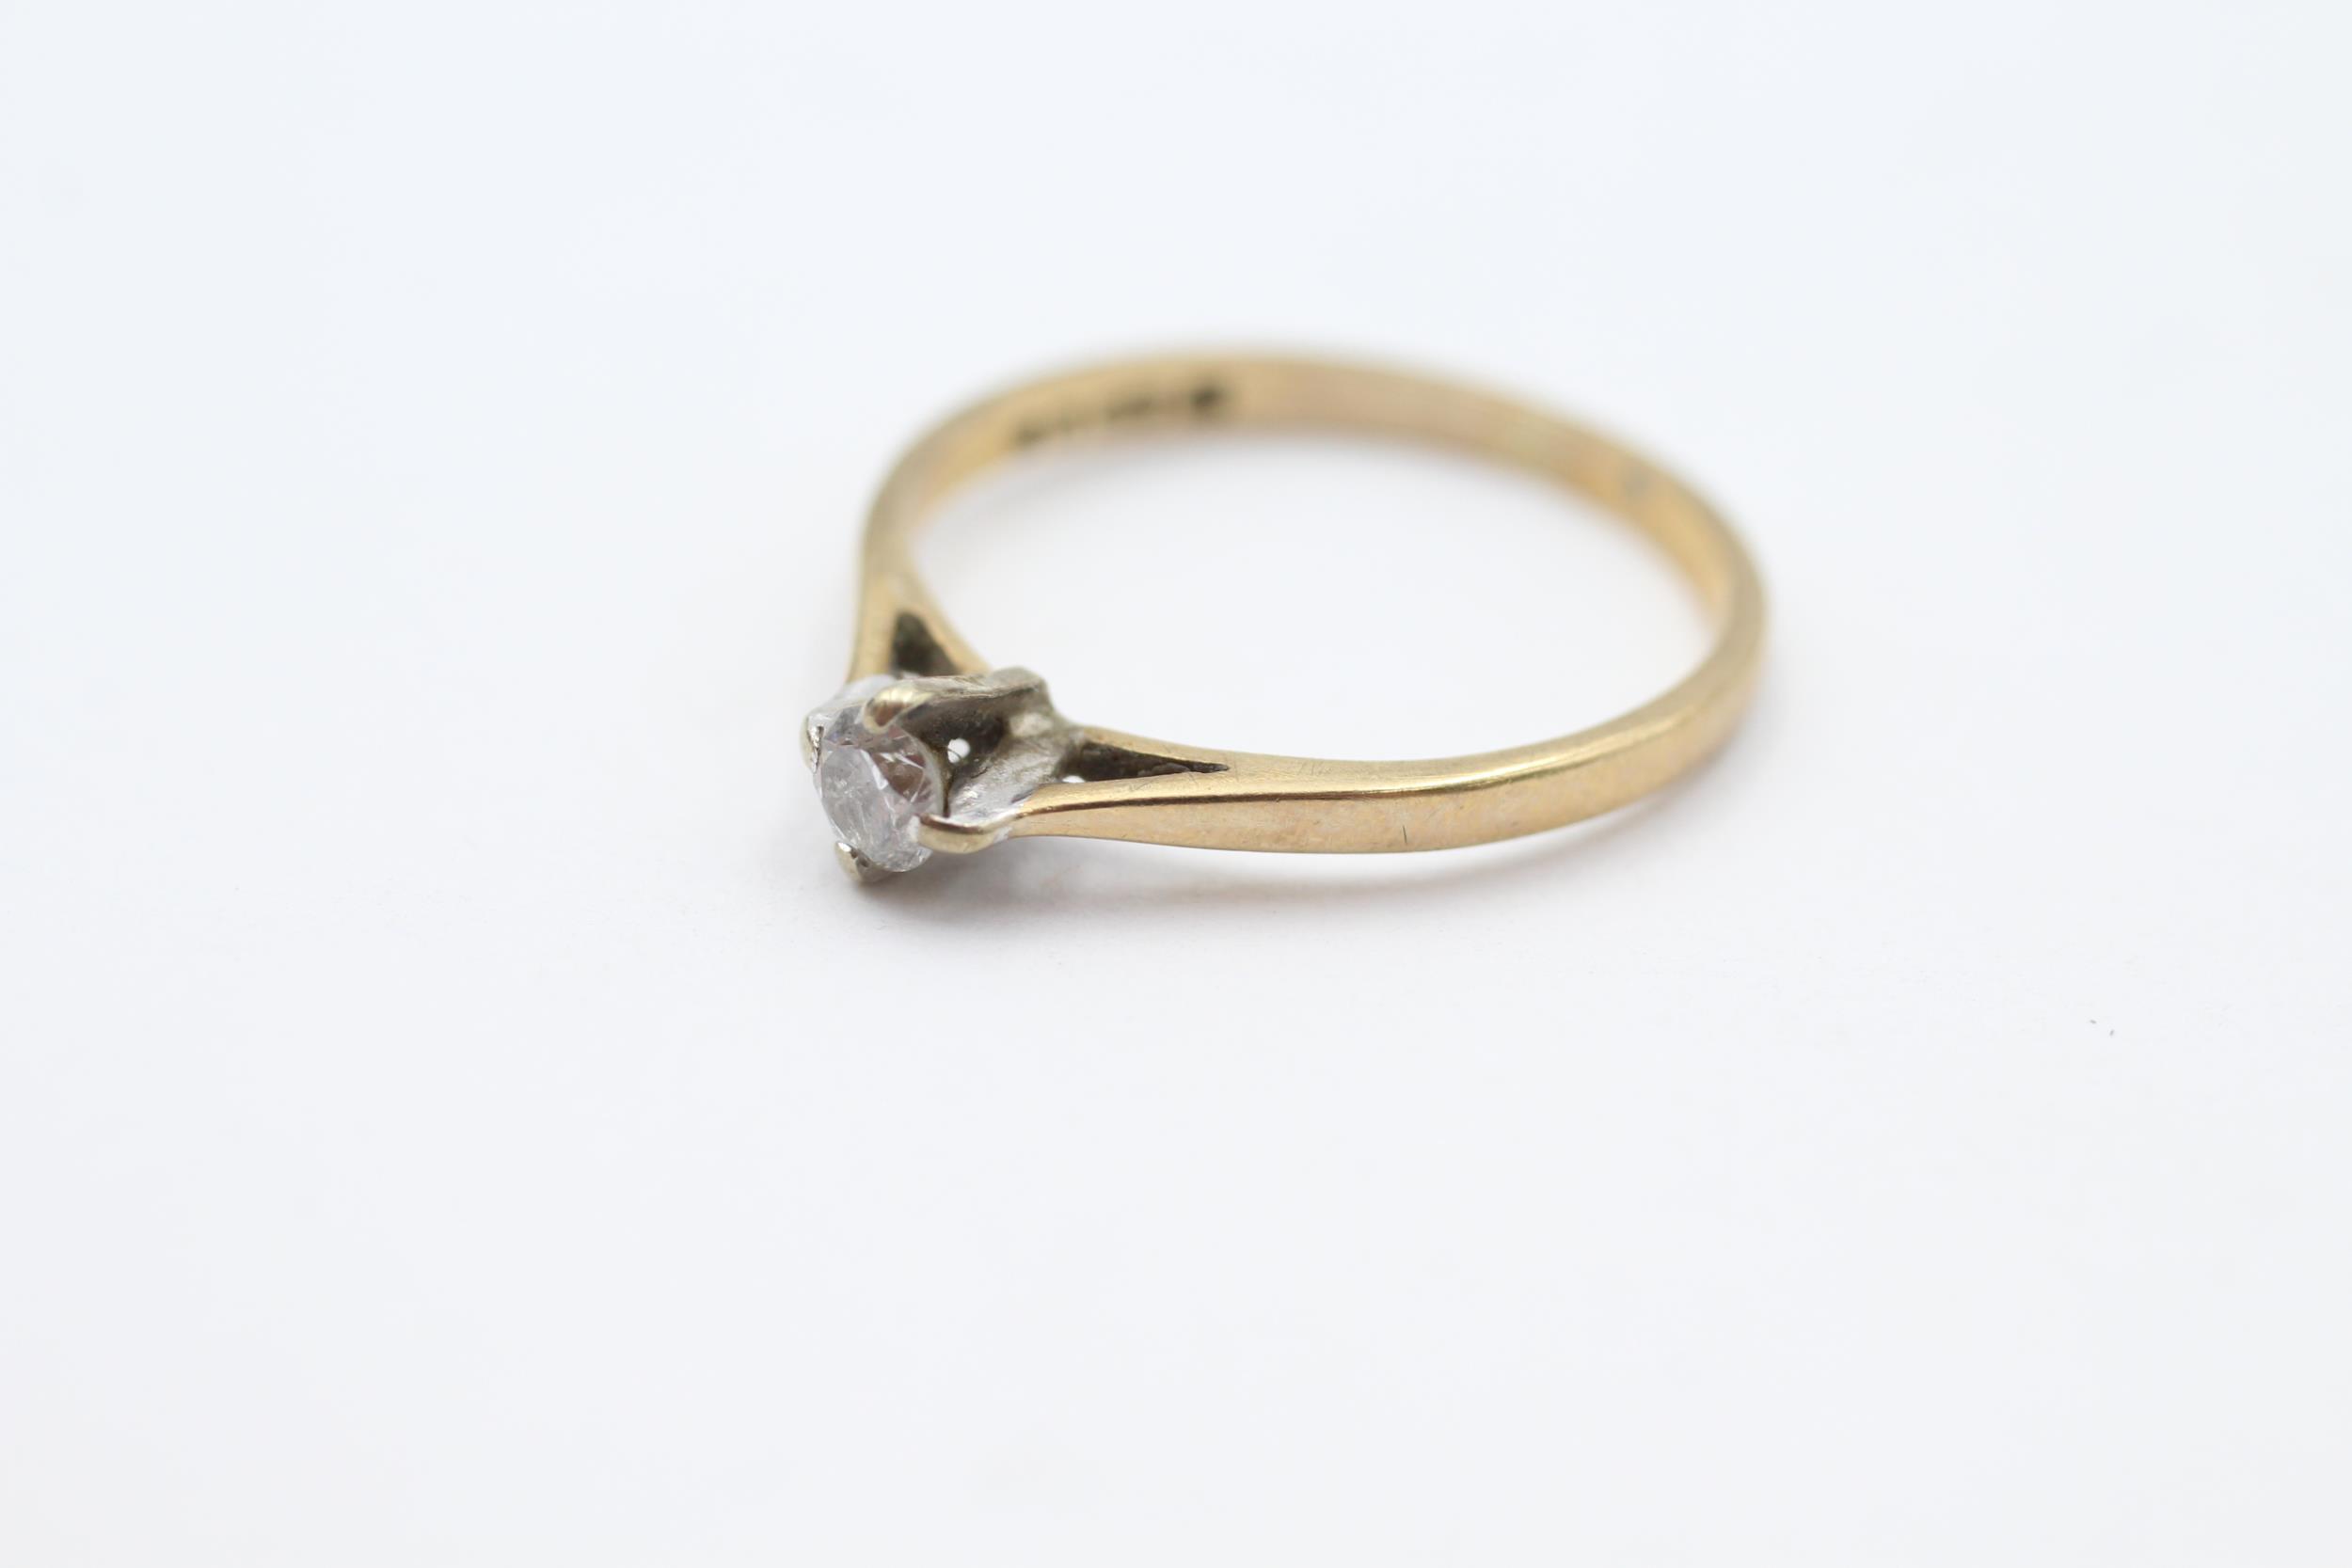 9ct gold diamond solitaire ring, claw set Size L - 1.2 g - Image 3 of 4